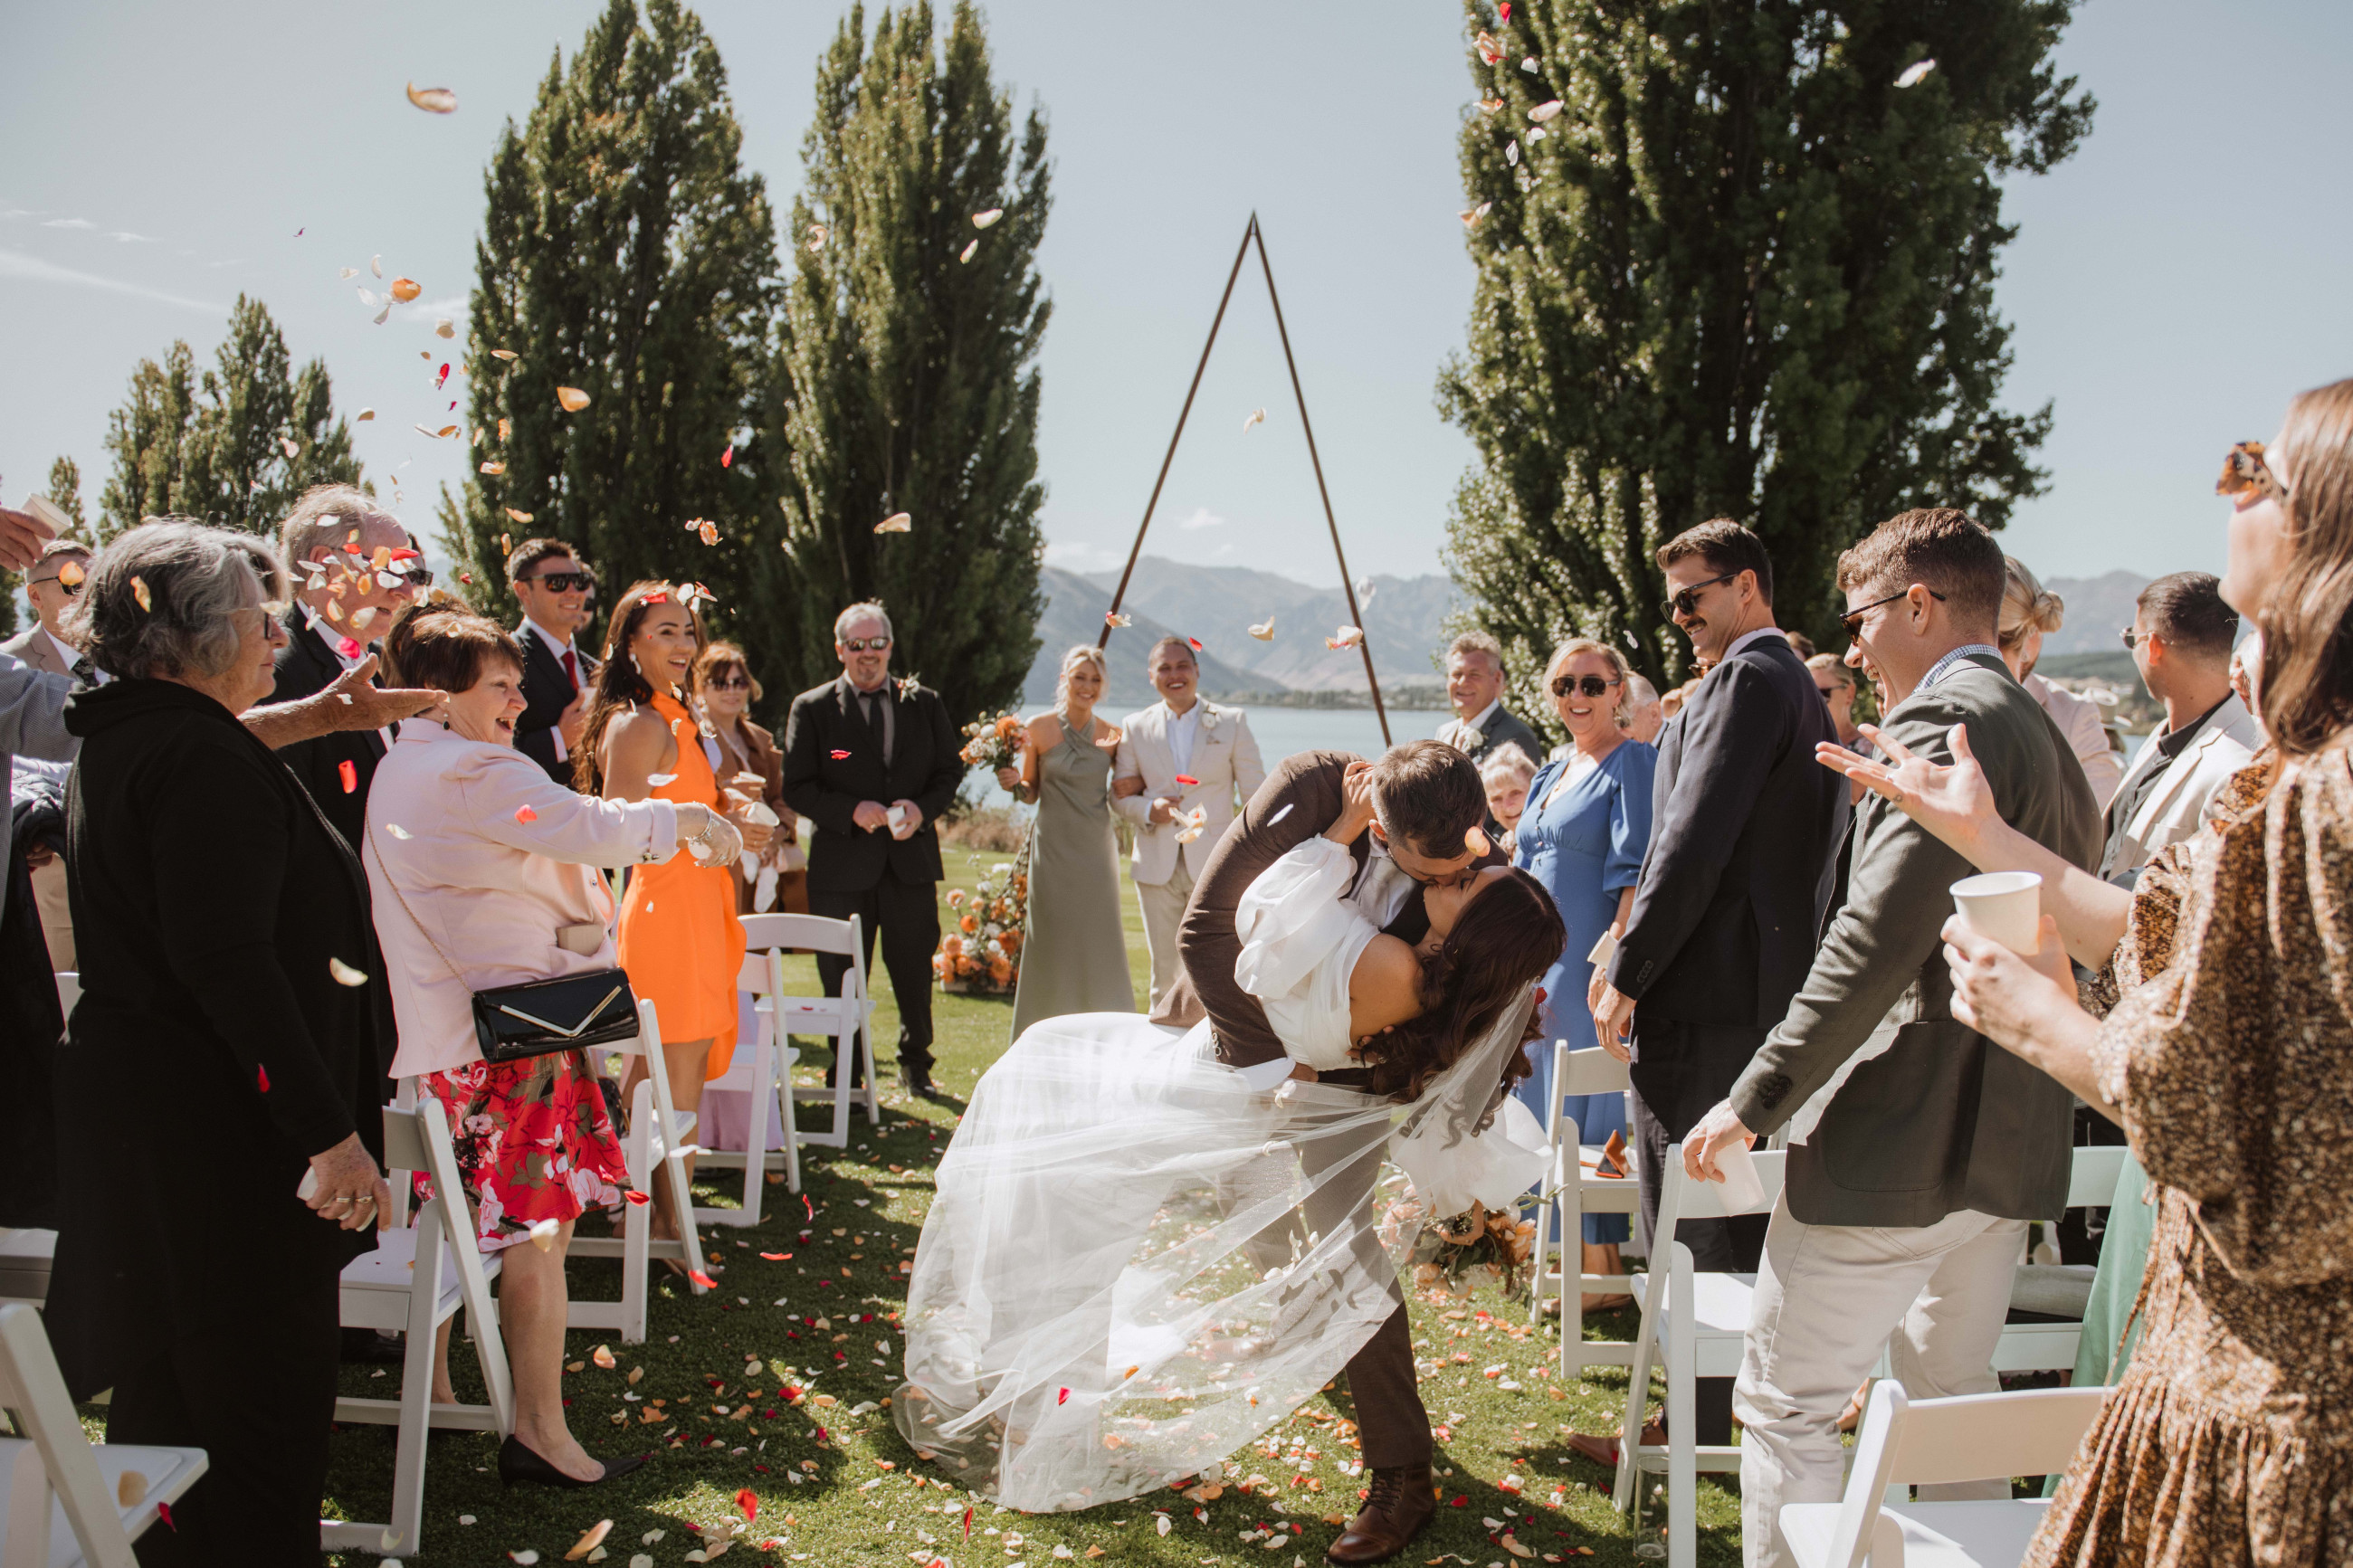 What better place than to celebrate your special day than by the waters edge in Wanaka, New Zealand?